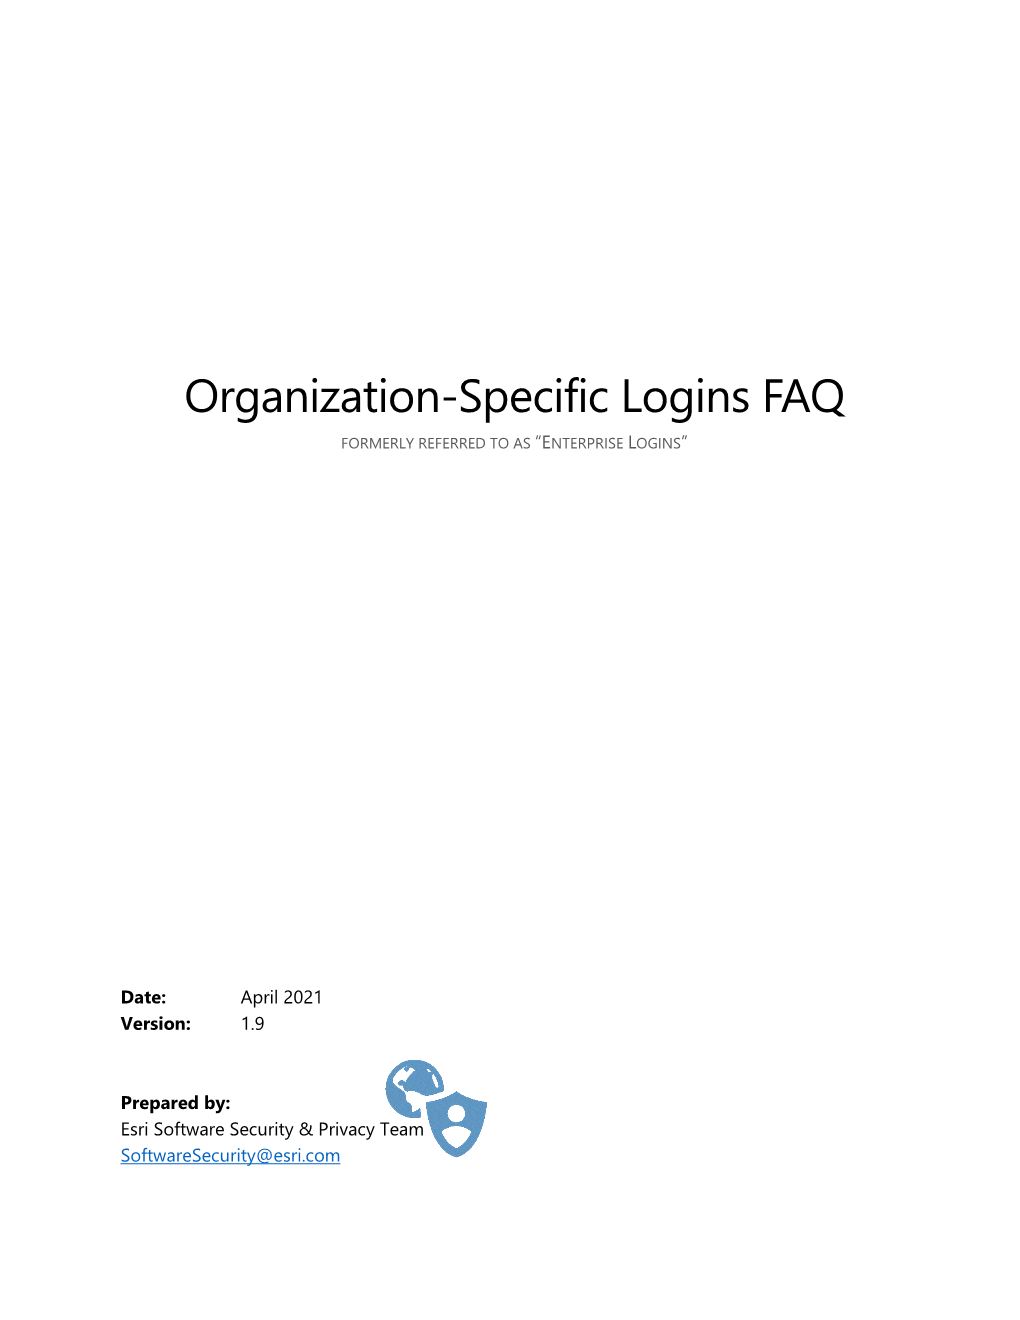 Organization-Specific Logins FAQ FORMERLY REFERRED to AS “ENTERPRISE LOGINS”